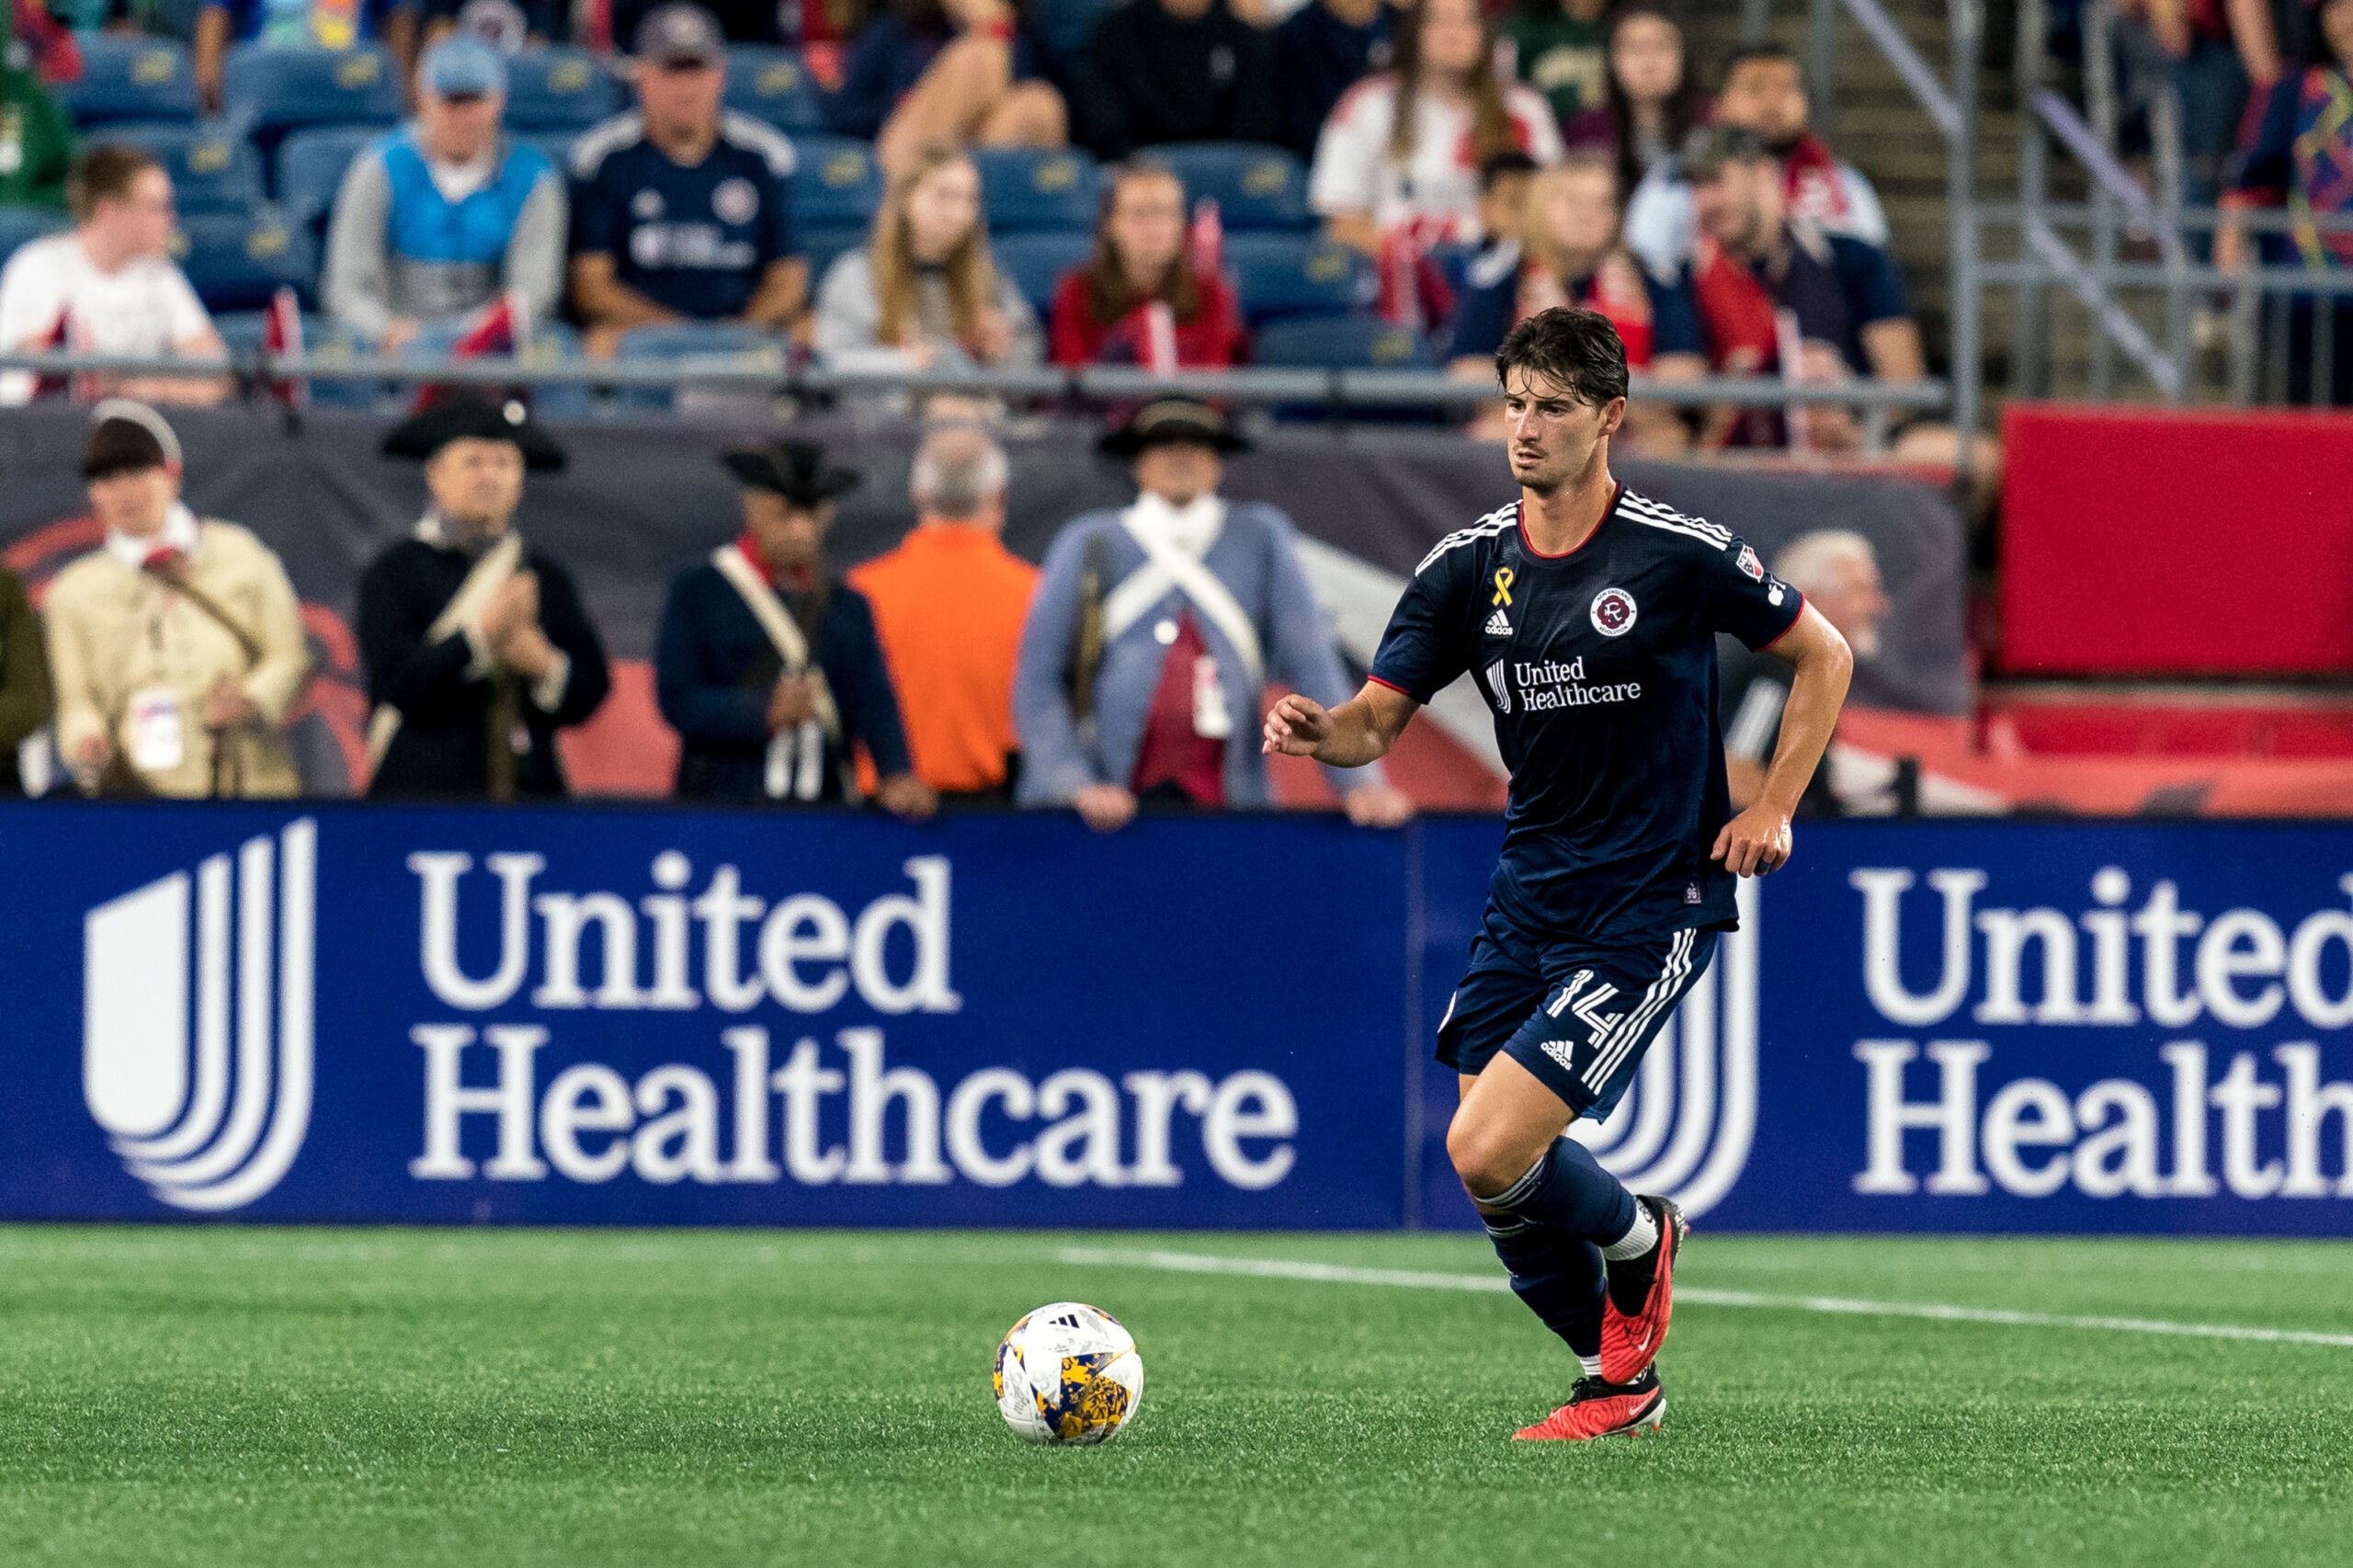 New England Revolution lead MLS heading into final 2 months